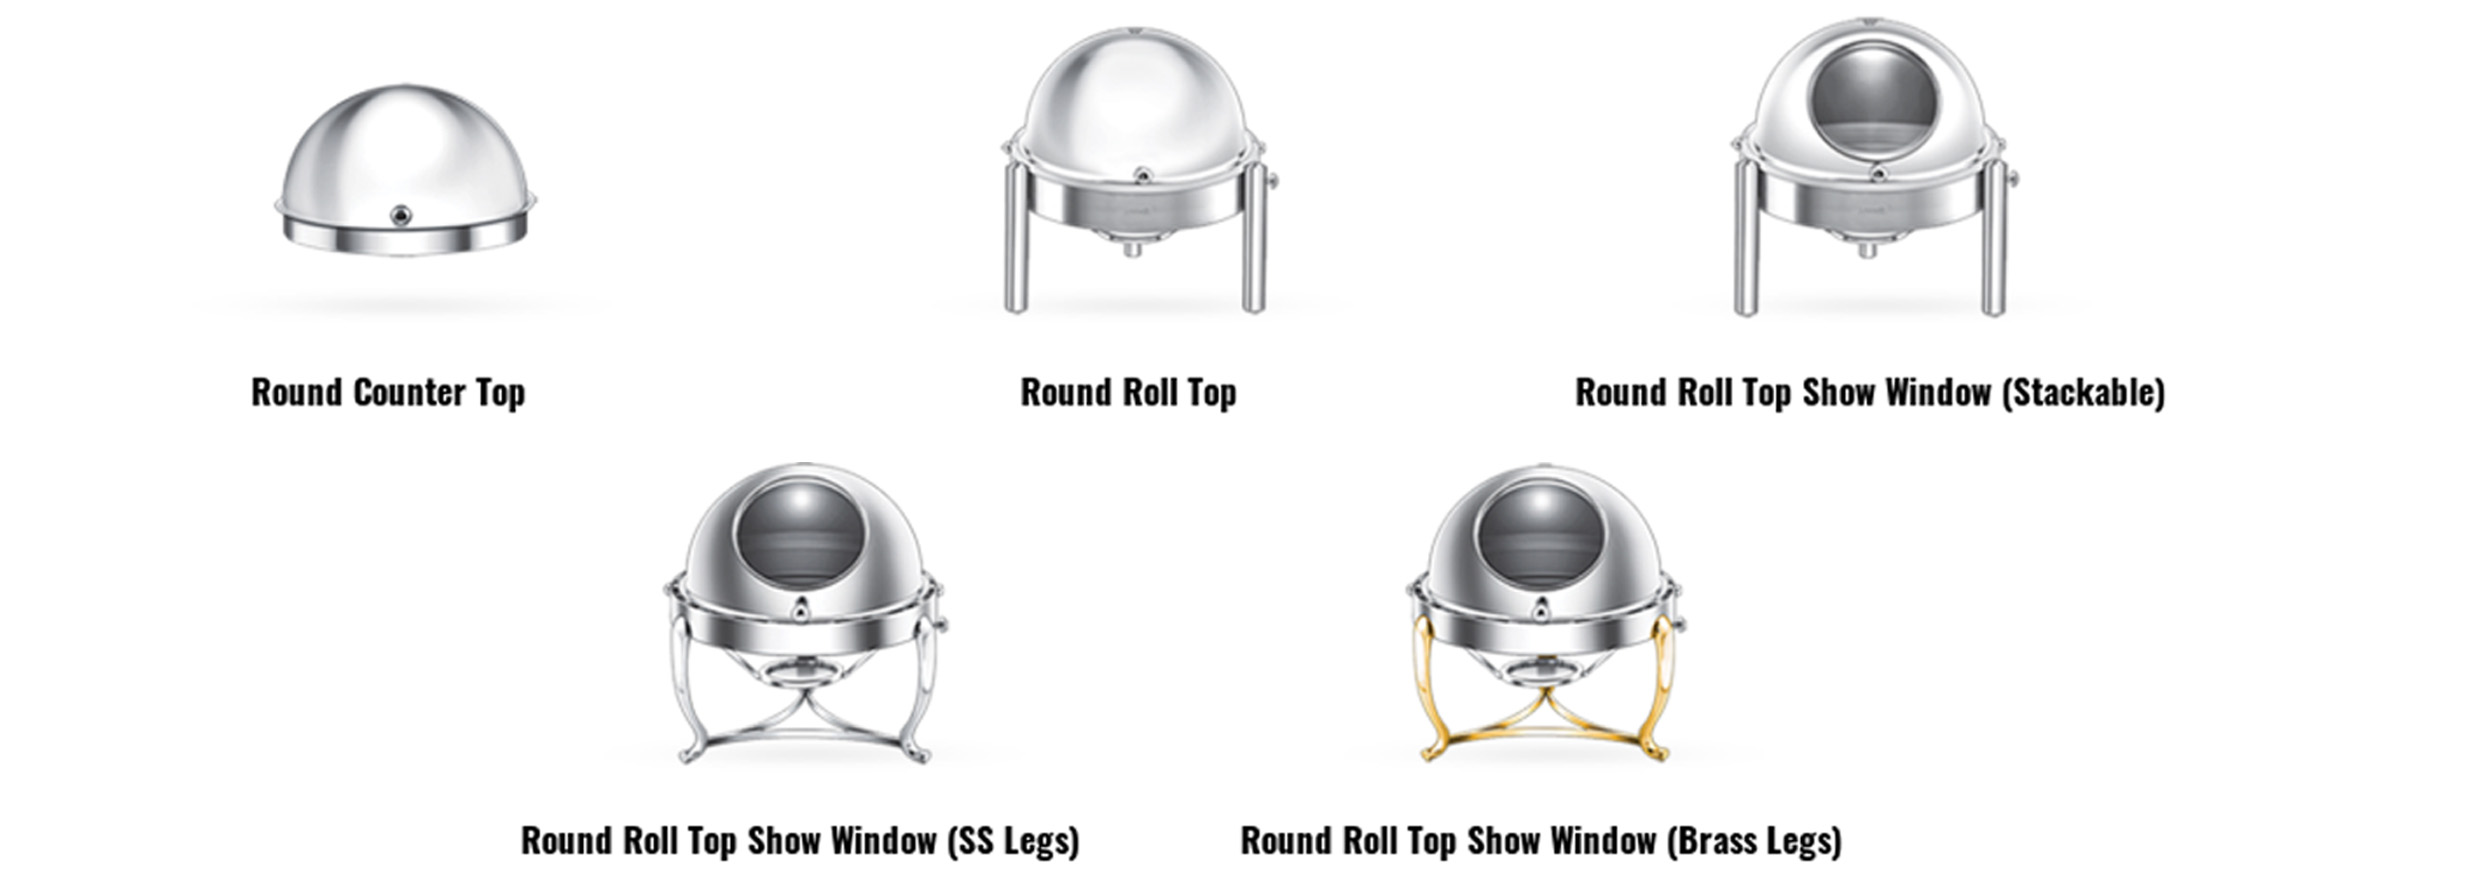 Best Chafing Dishes Manufacturers in India